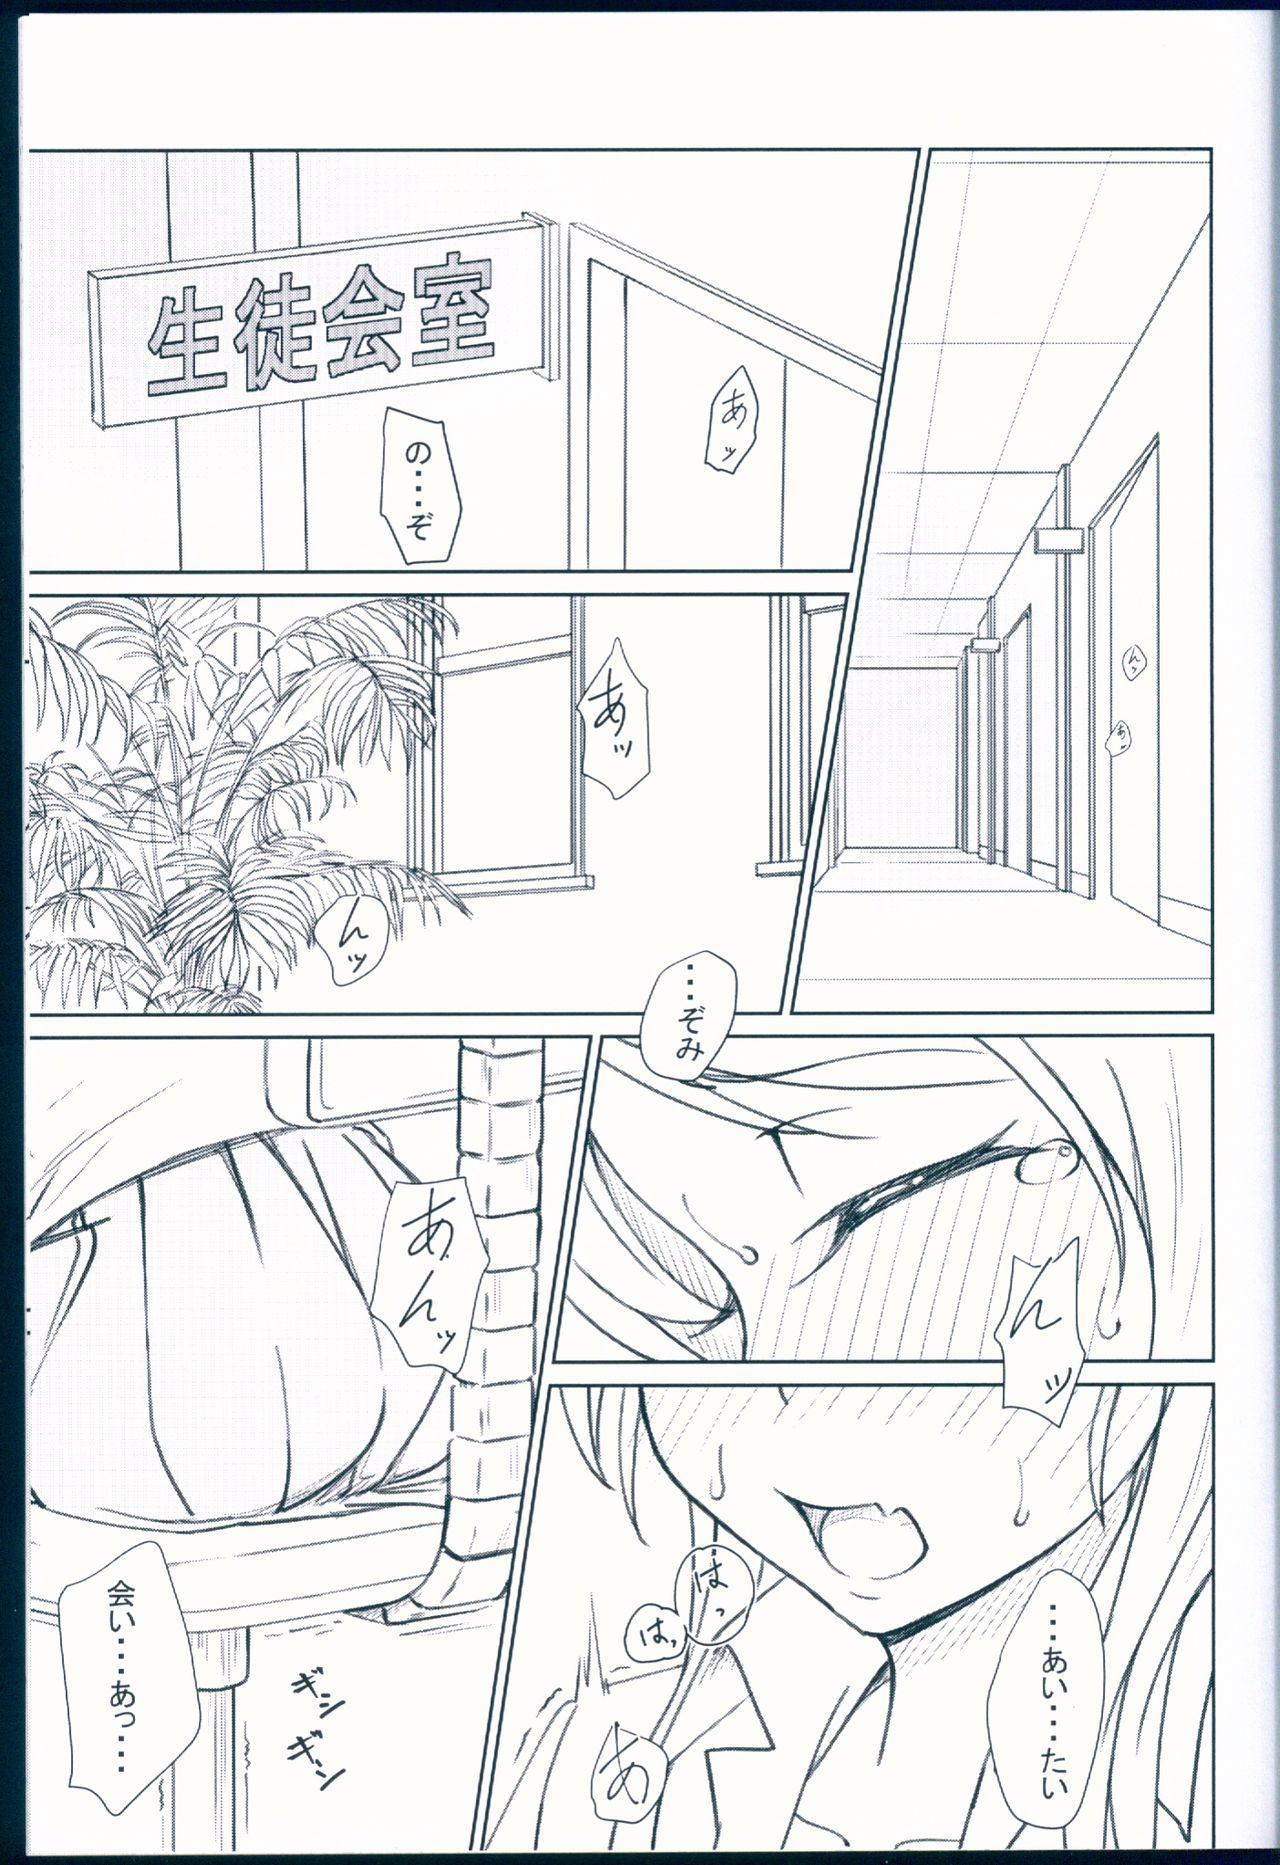 Behind NOZOERI REUNION - Love live Pussysex - Page 3